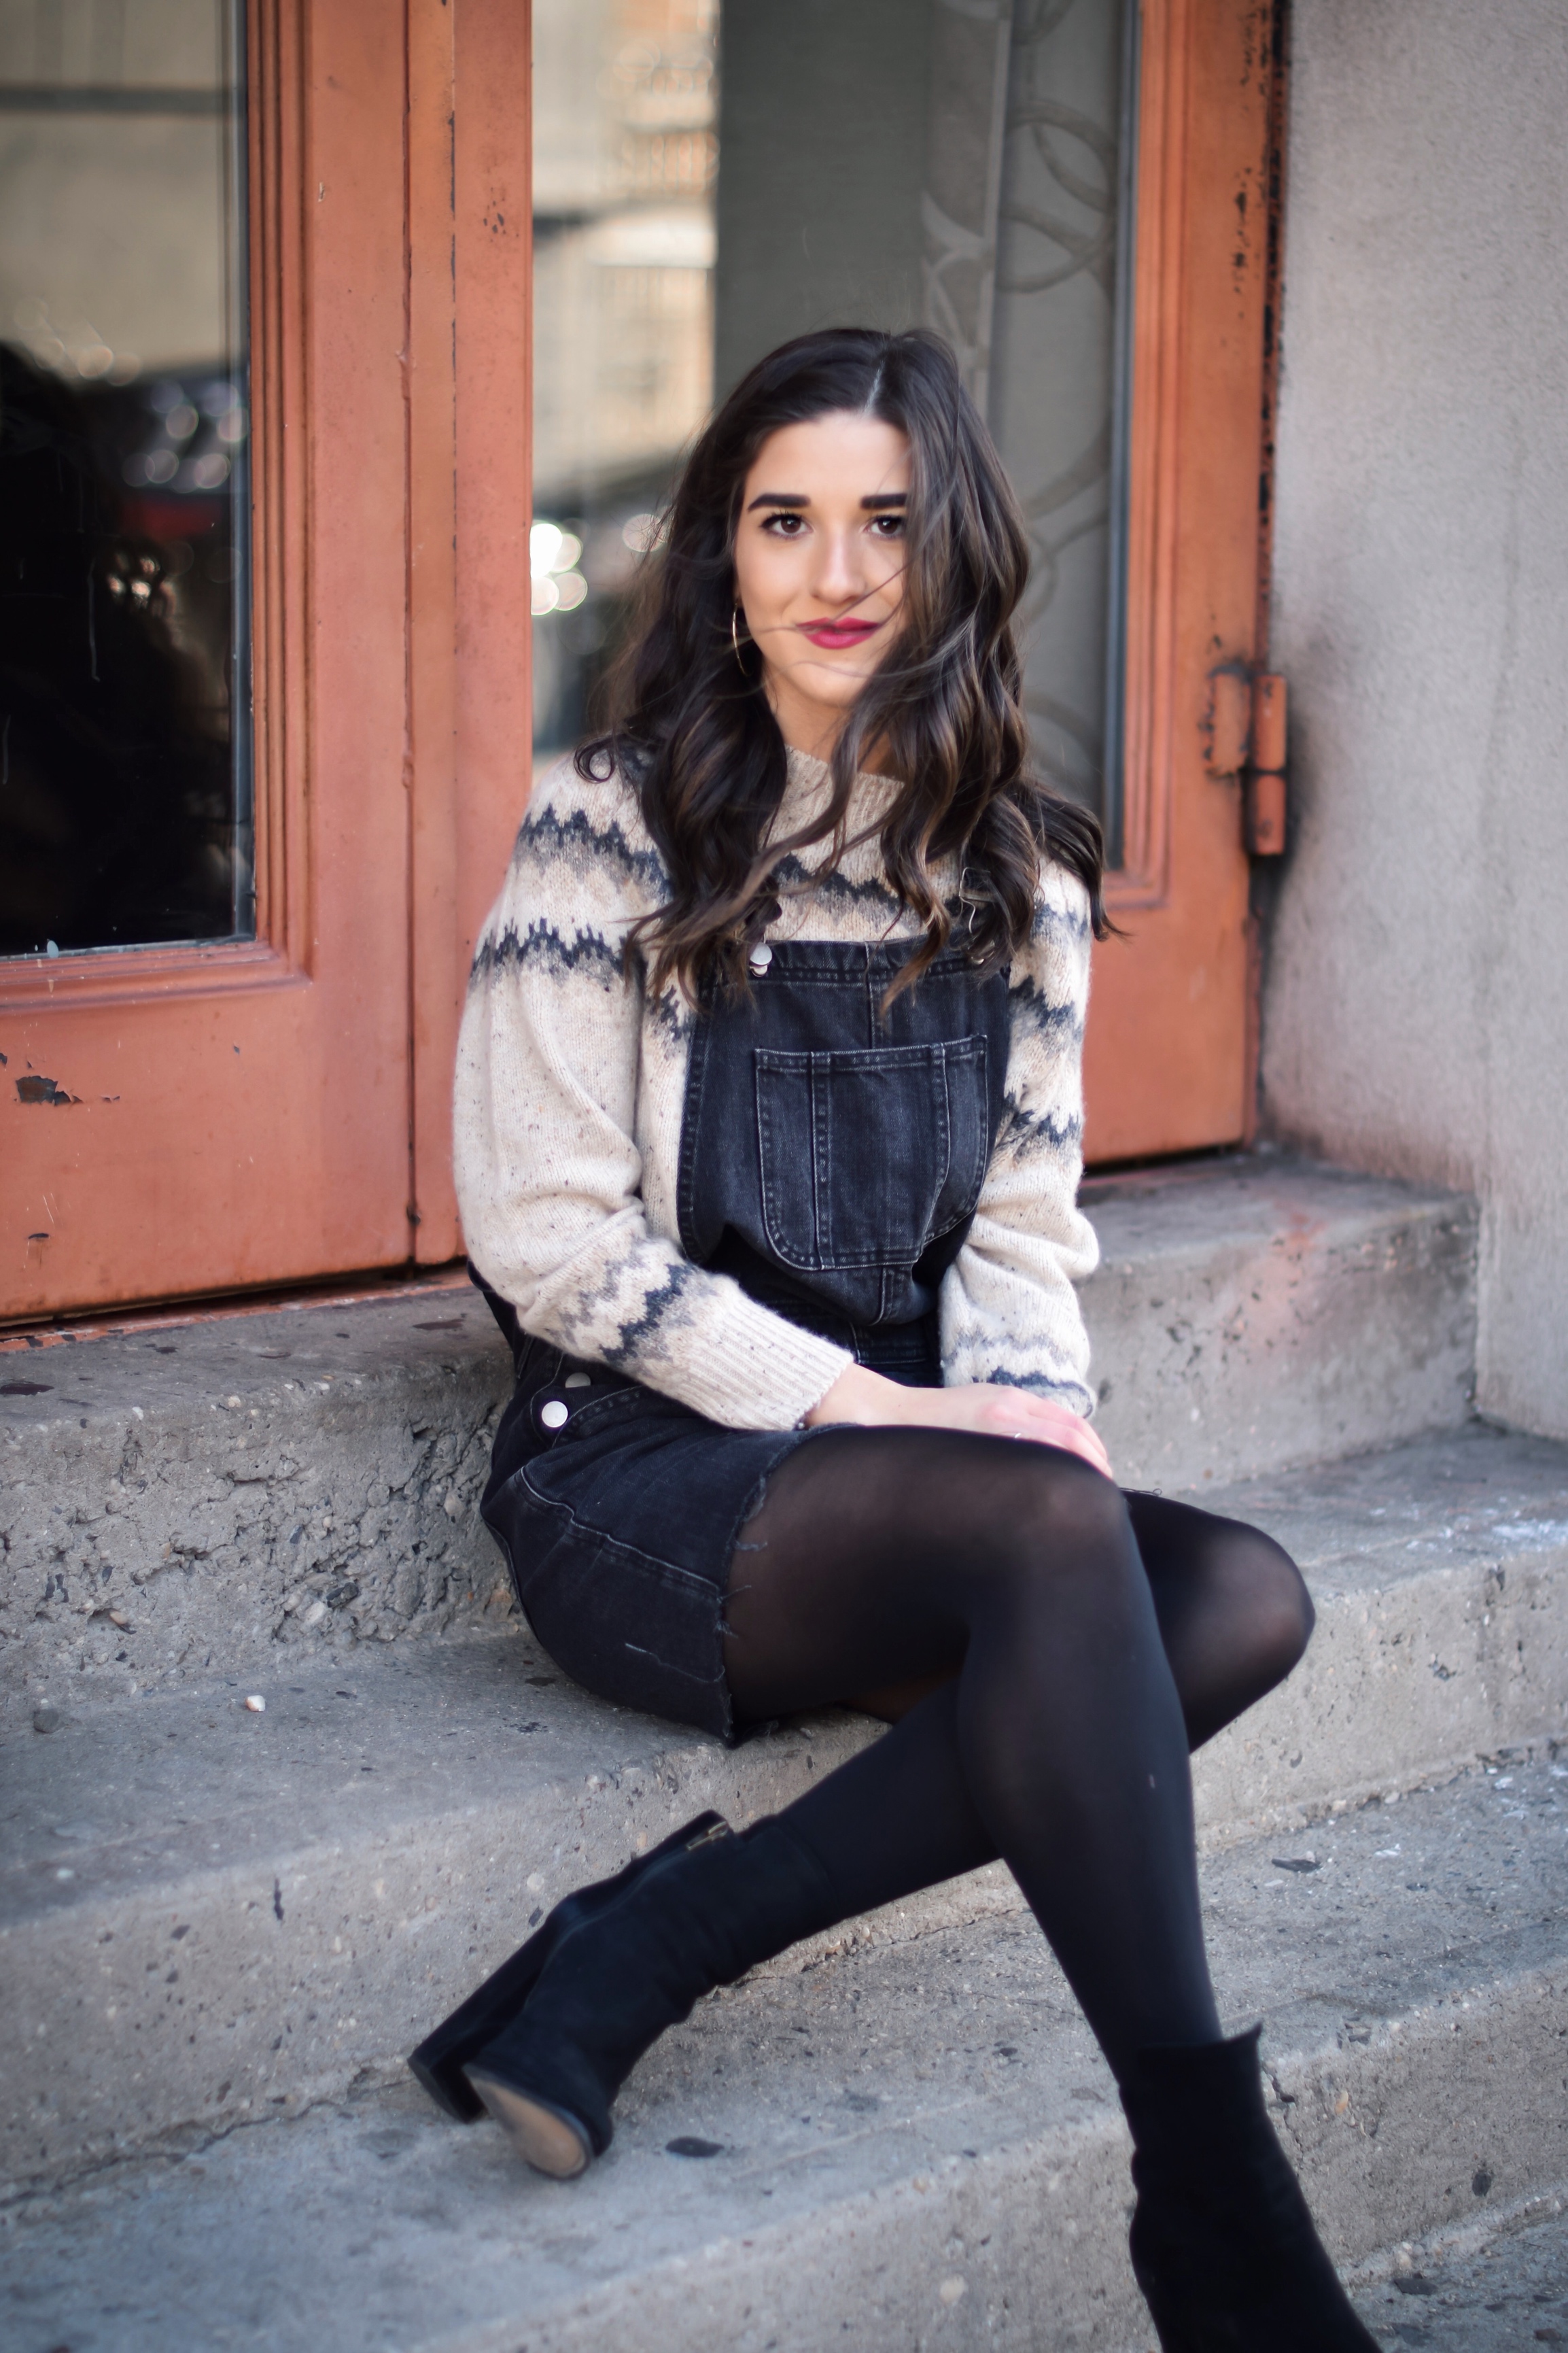 overall dress with sweater